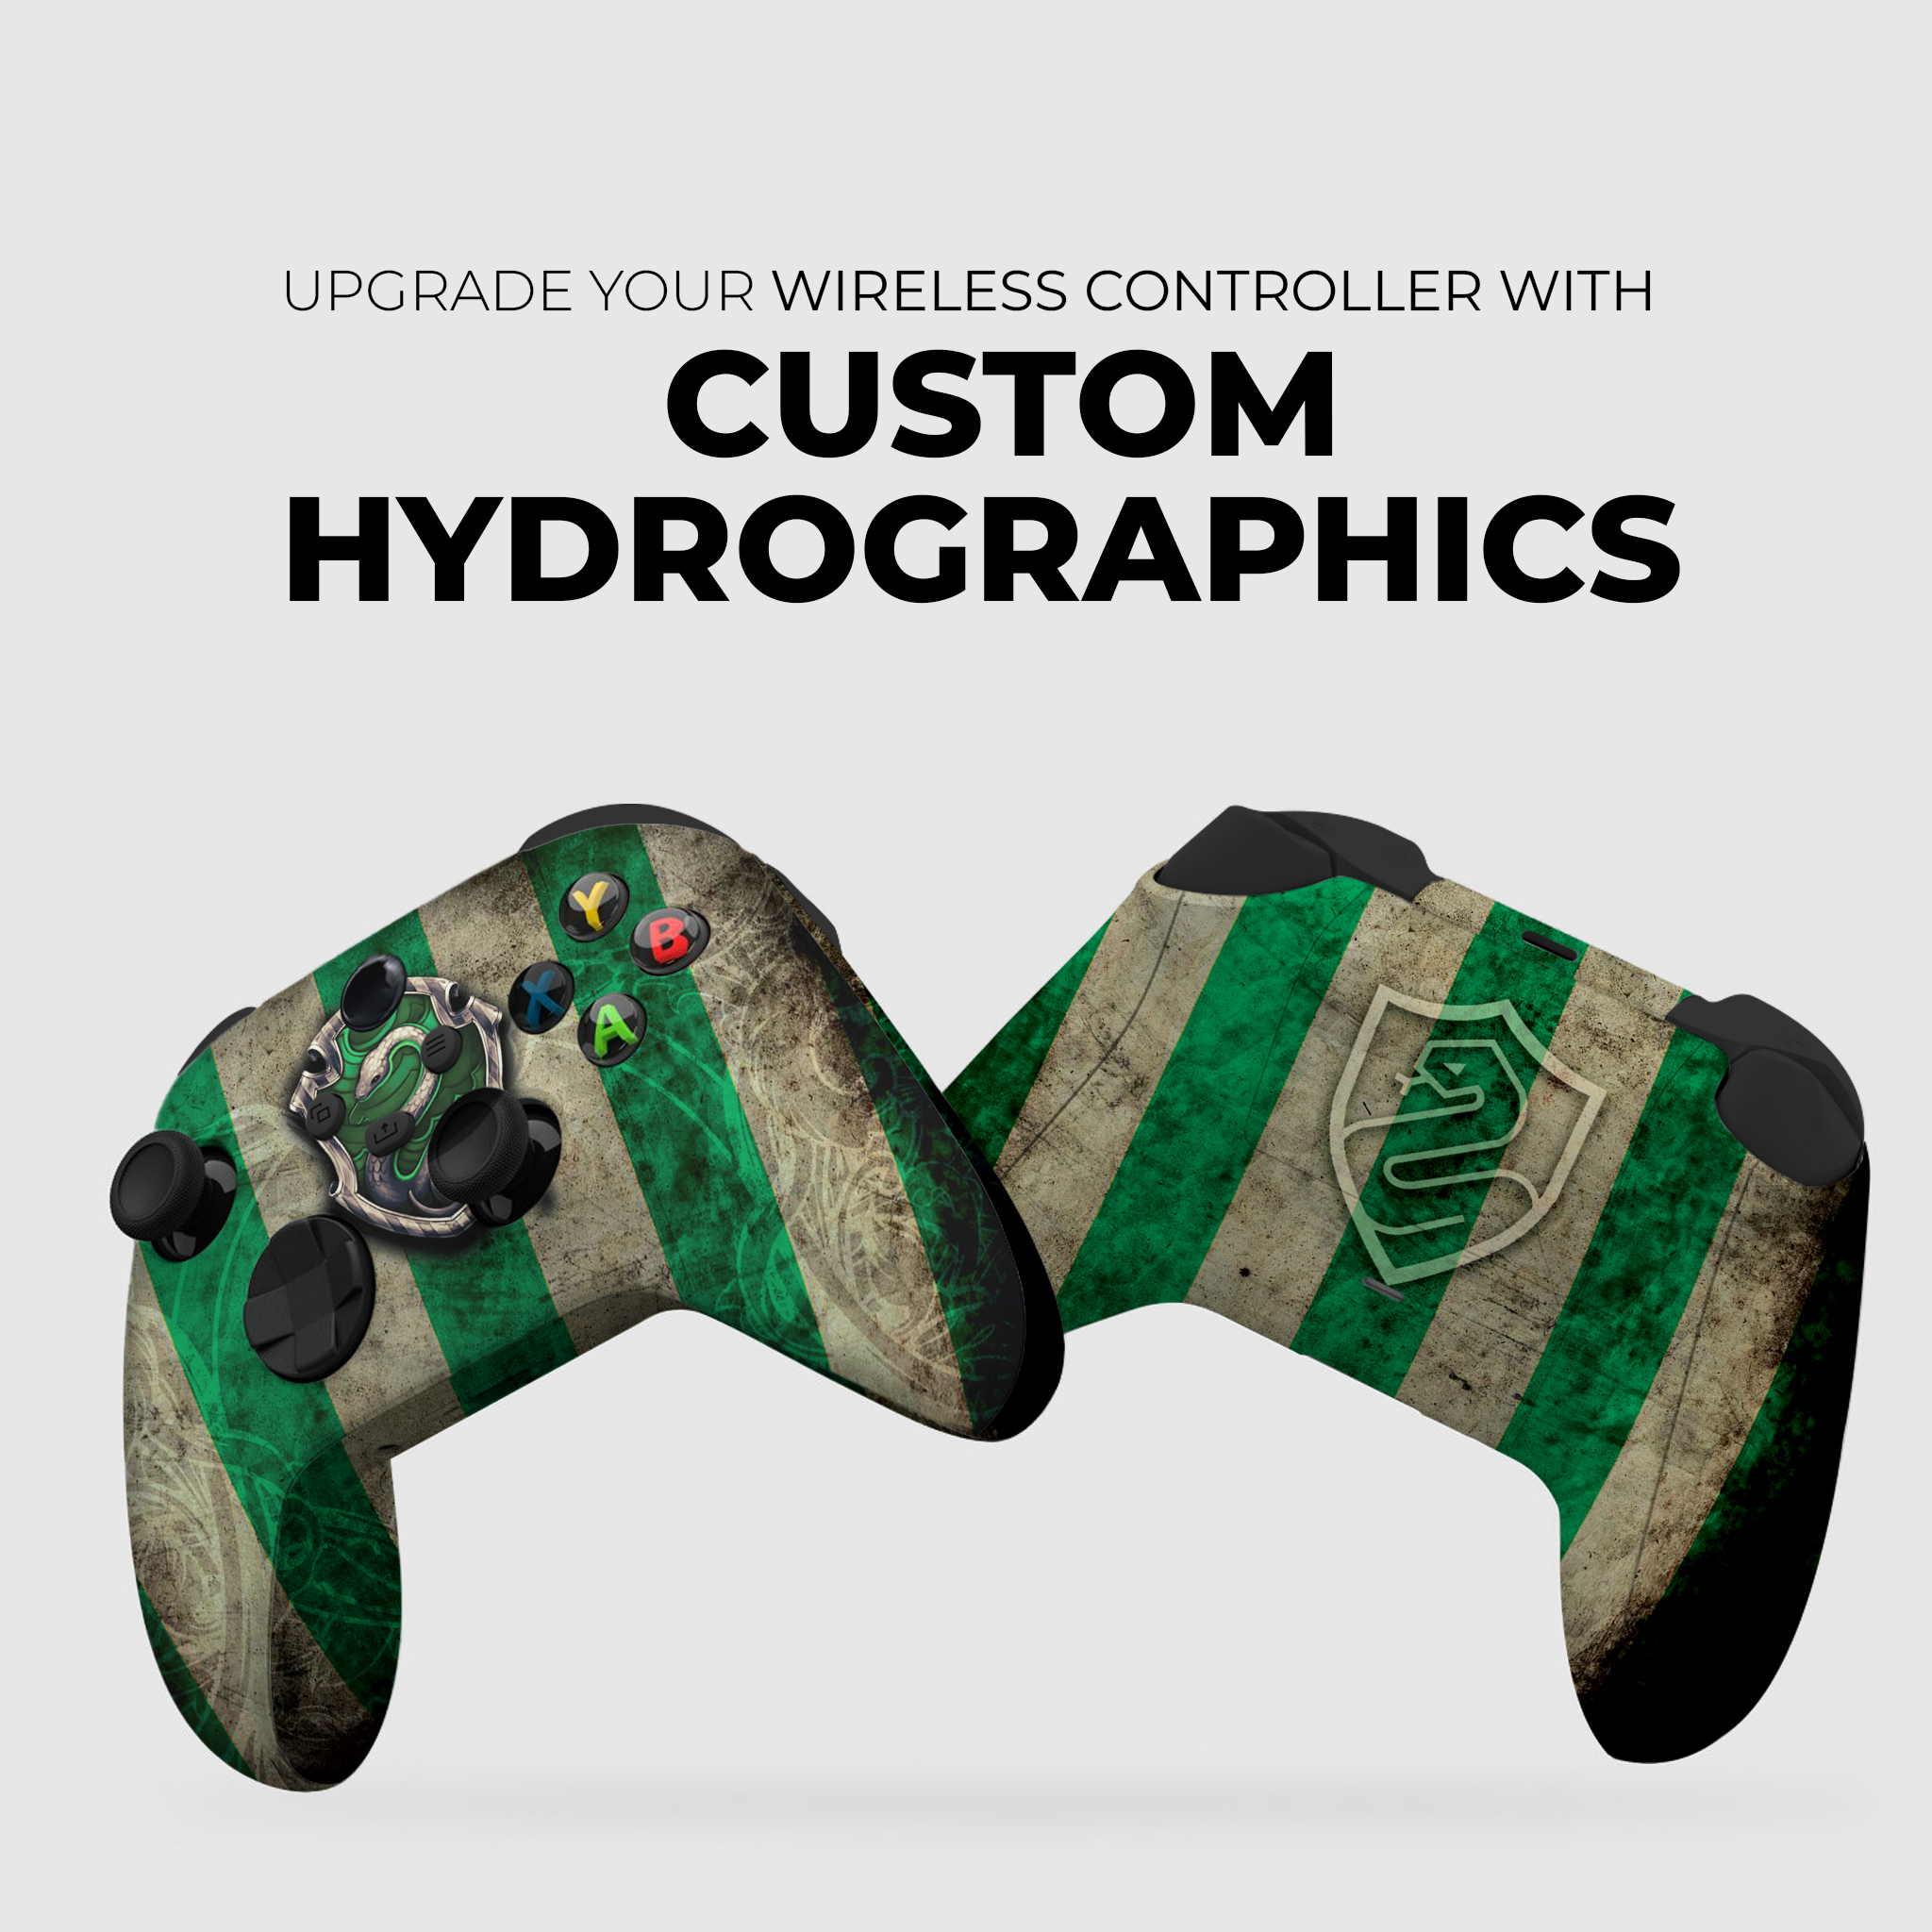 Harry Potter House Crest Slytherin Xbox Series X Controller